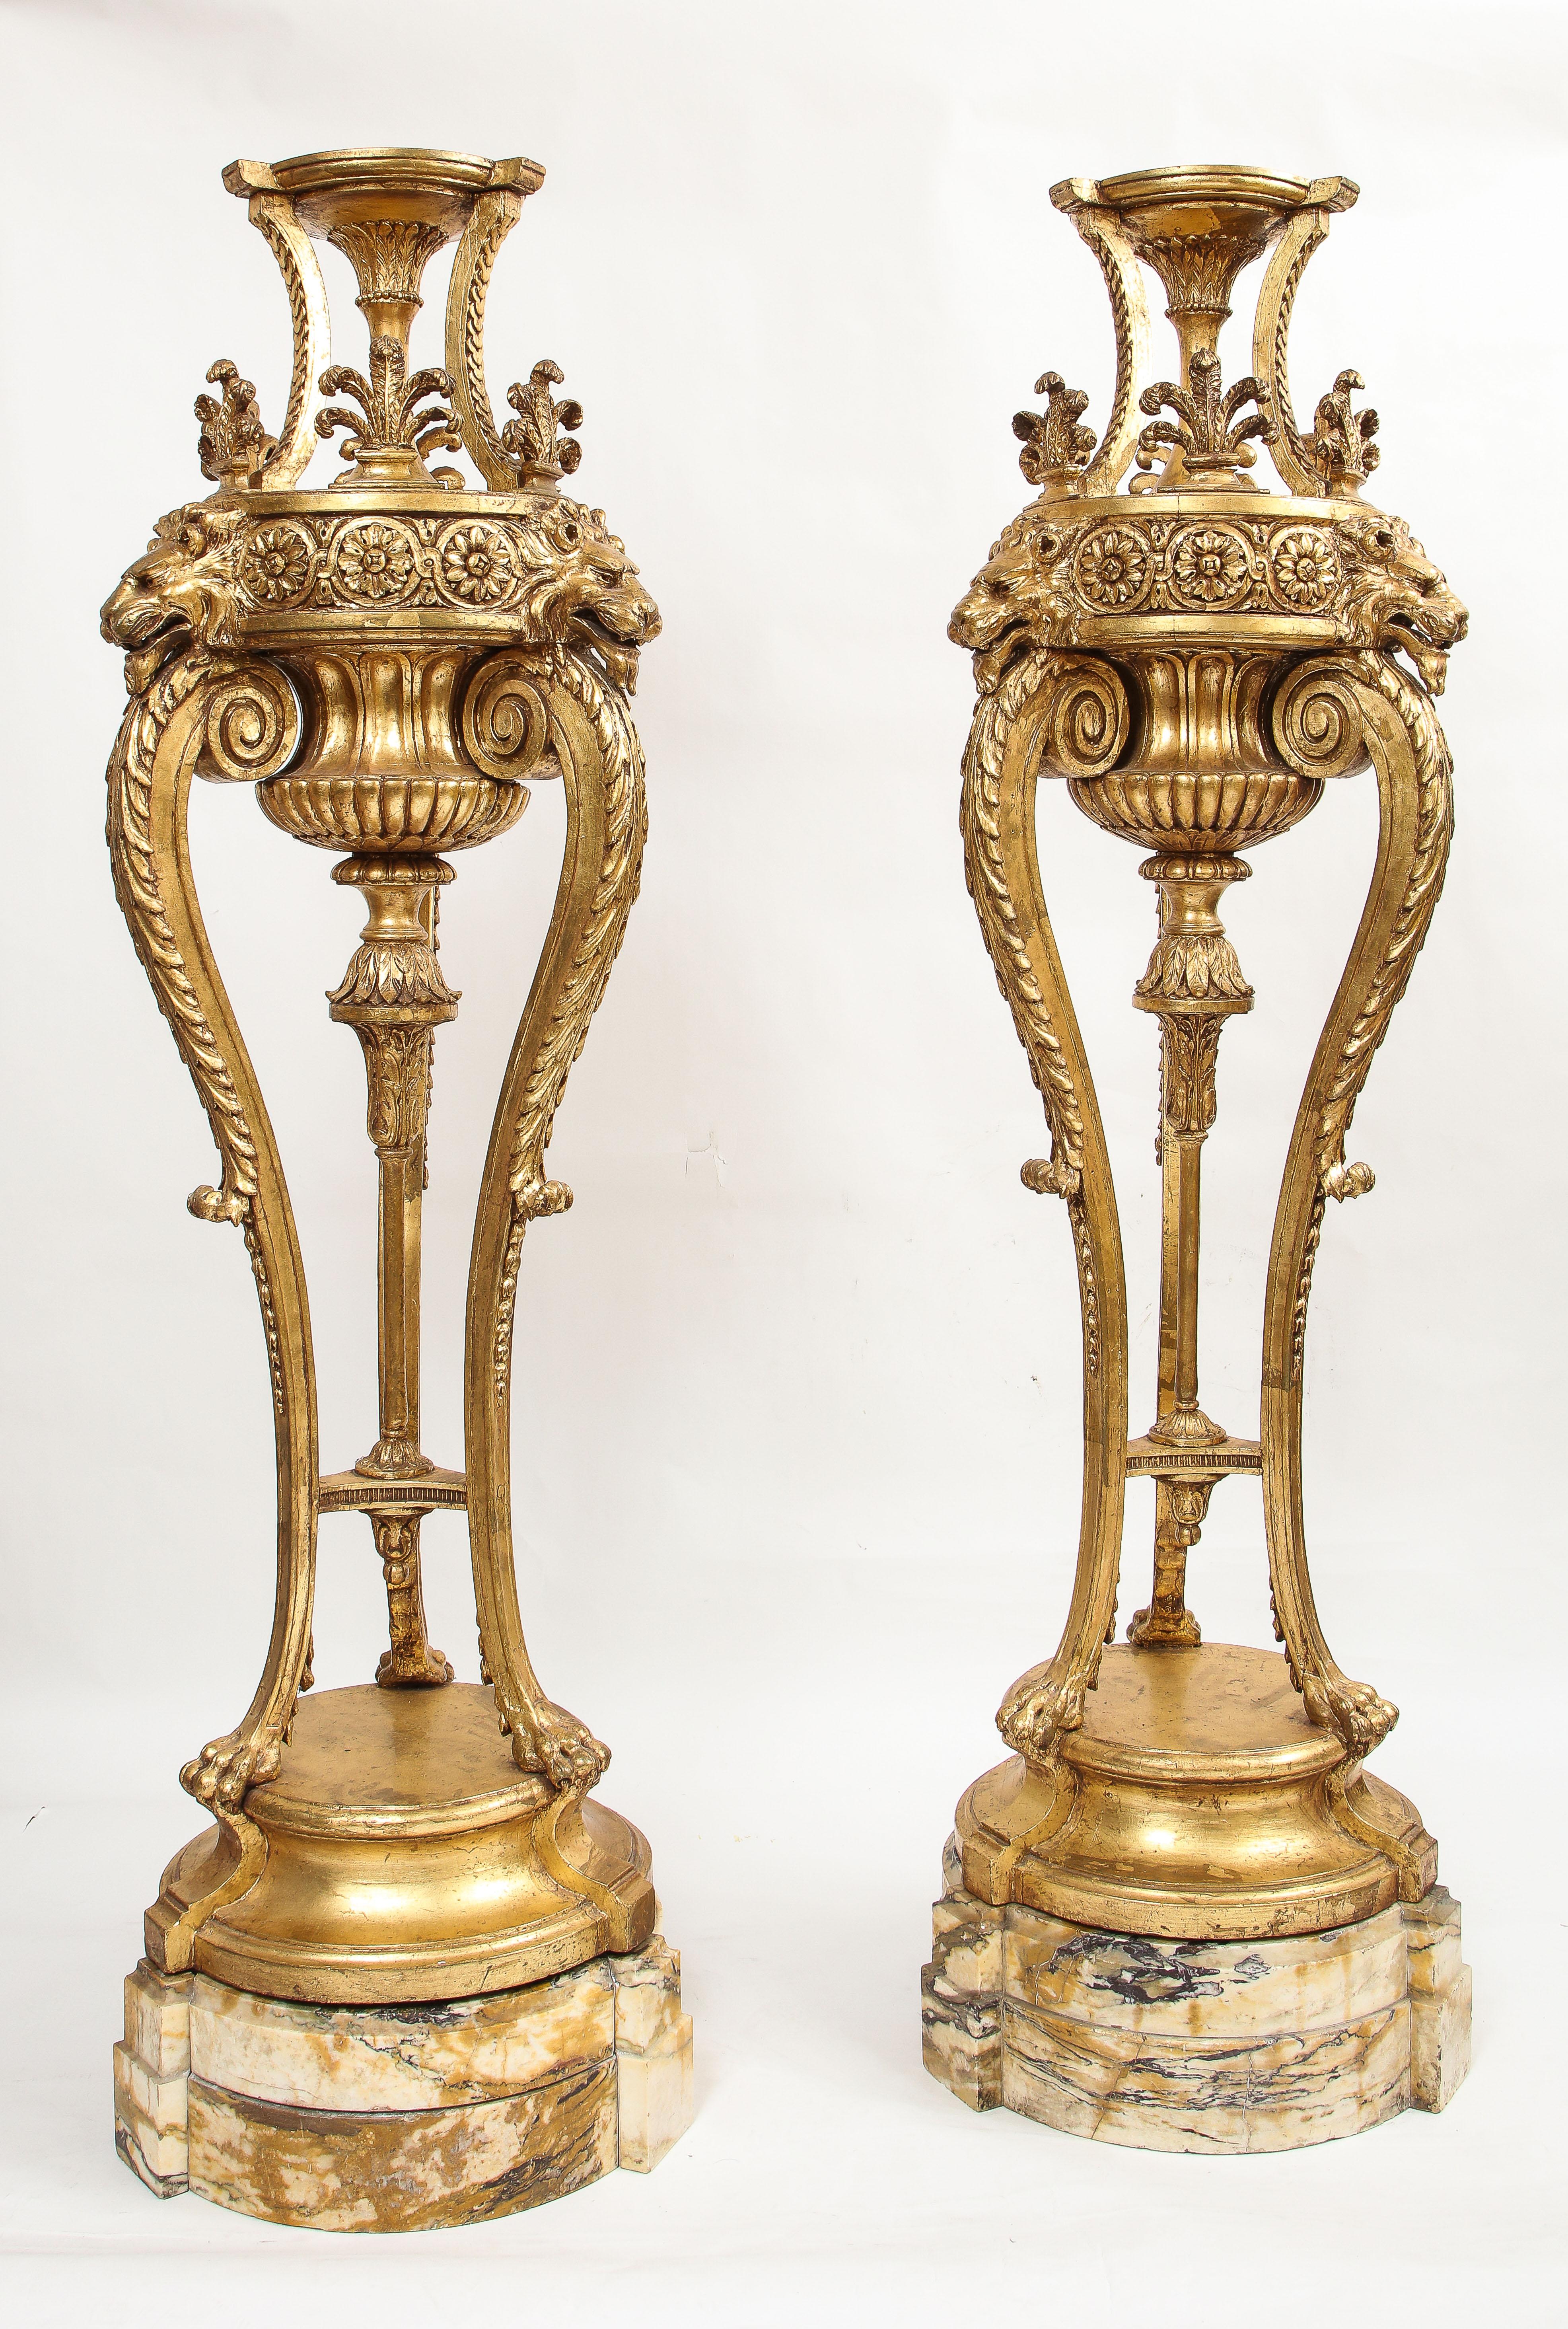 Louis XVI A Pair of Monumental 19th Century Giltwood Torchieres with Original Marble Bases